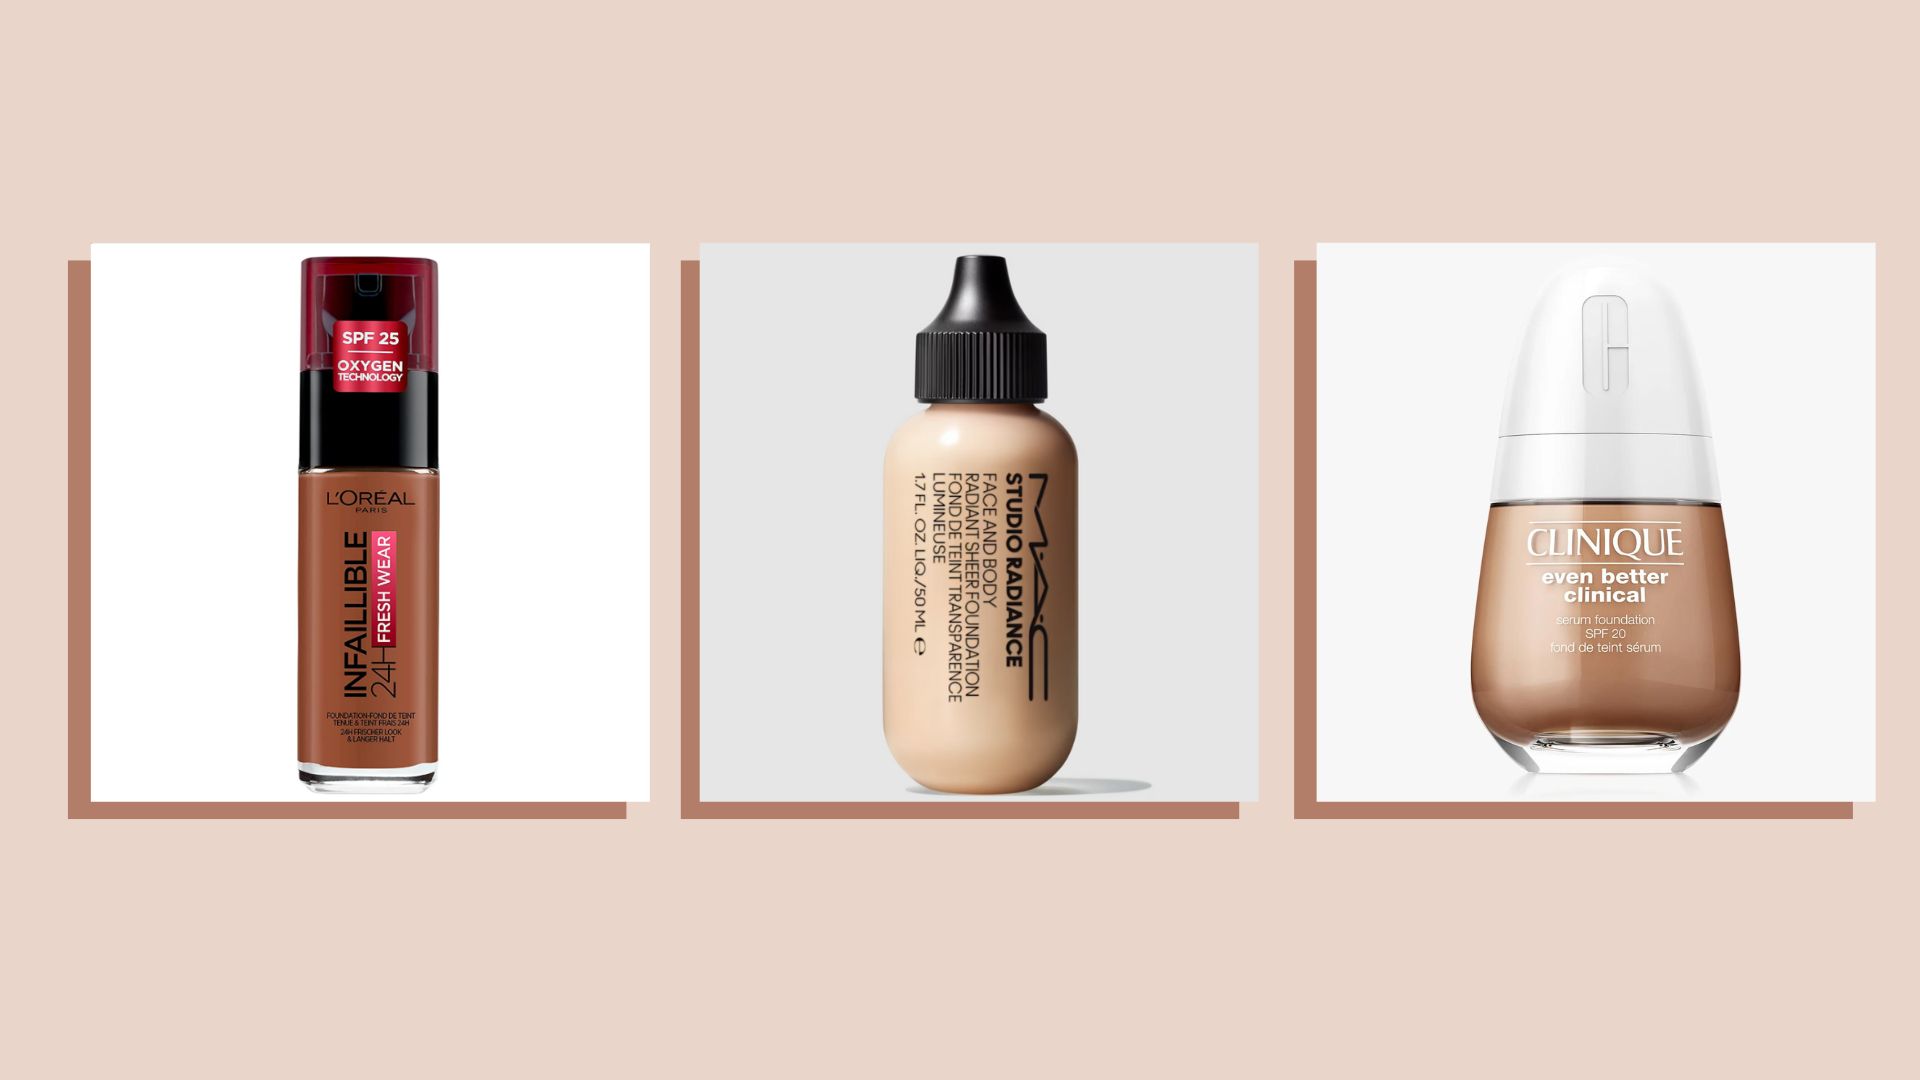 The 12 Best Waterproof Foundations of 2023